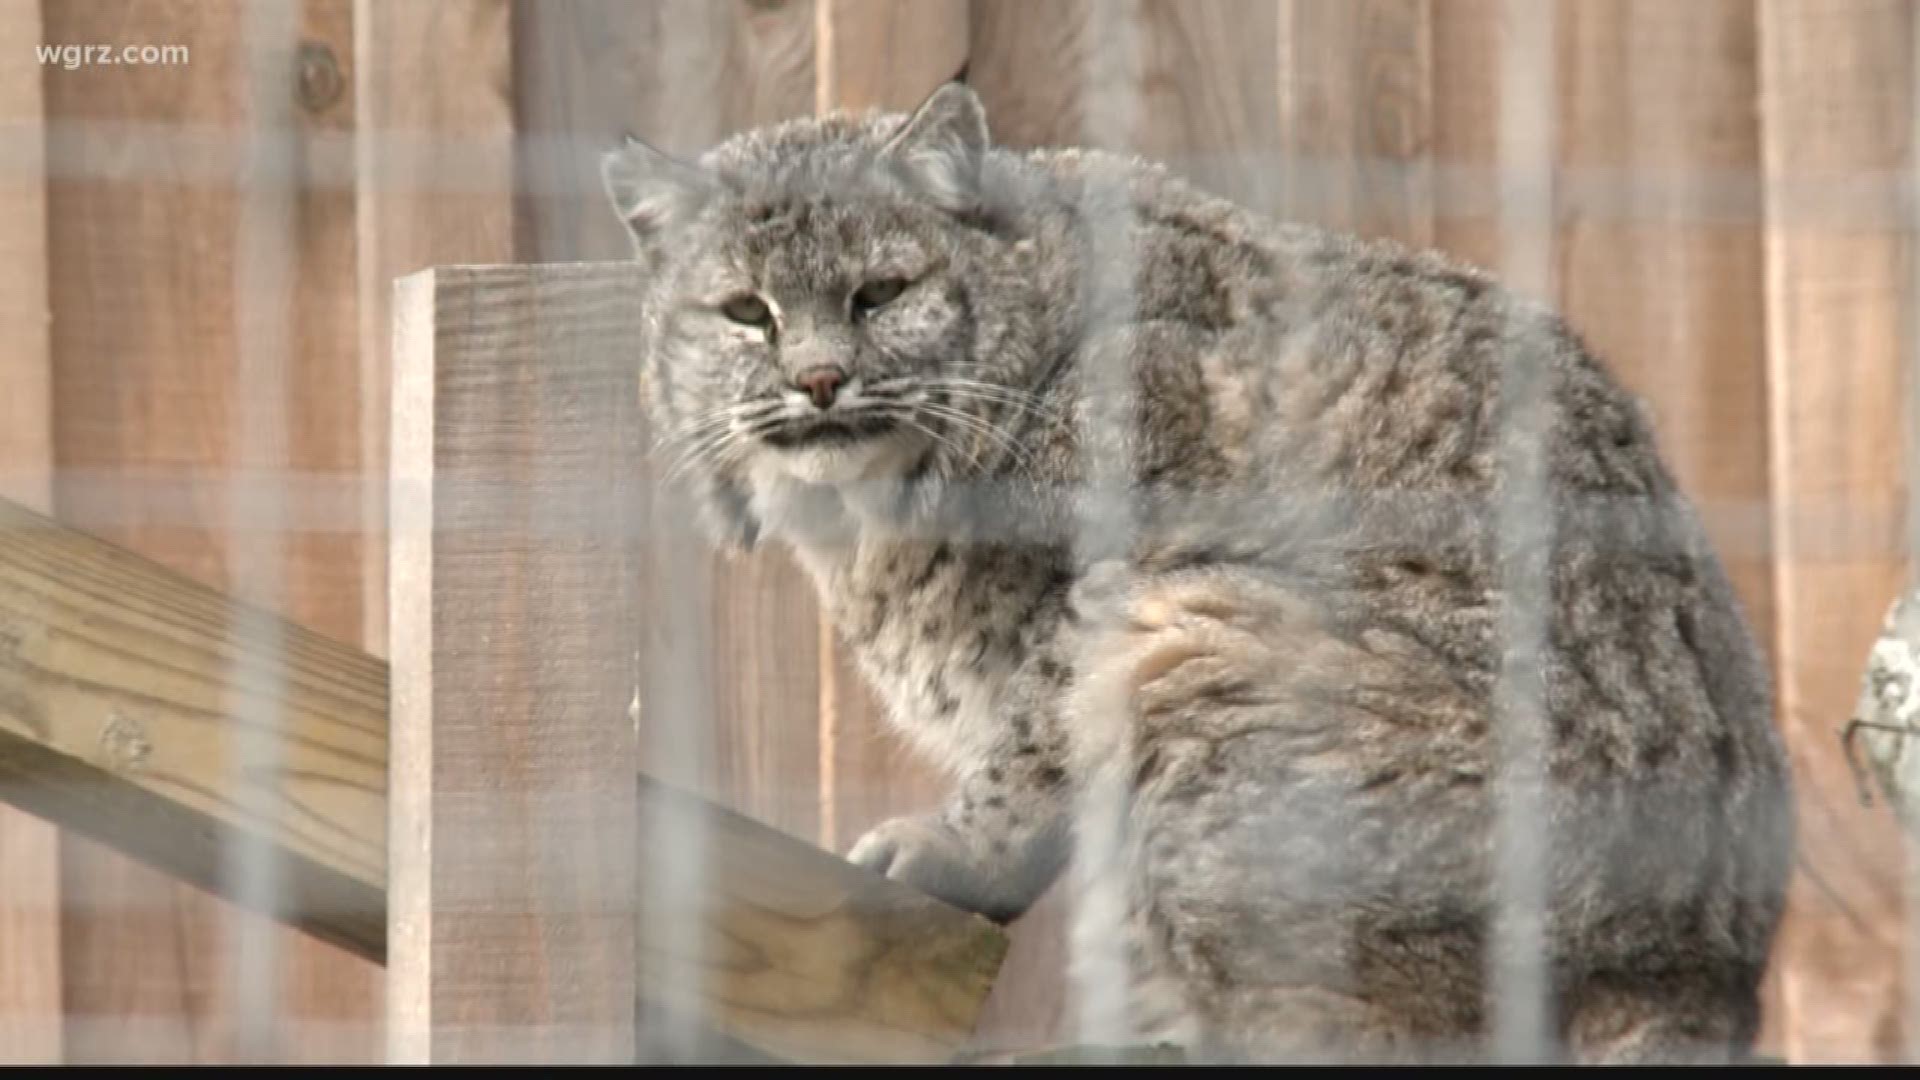 In this week's 2 the Outdoors, Terry Belke discusses bobcats in Western New York and how they are often misunderstood and feared animals.